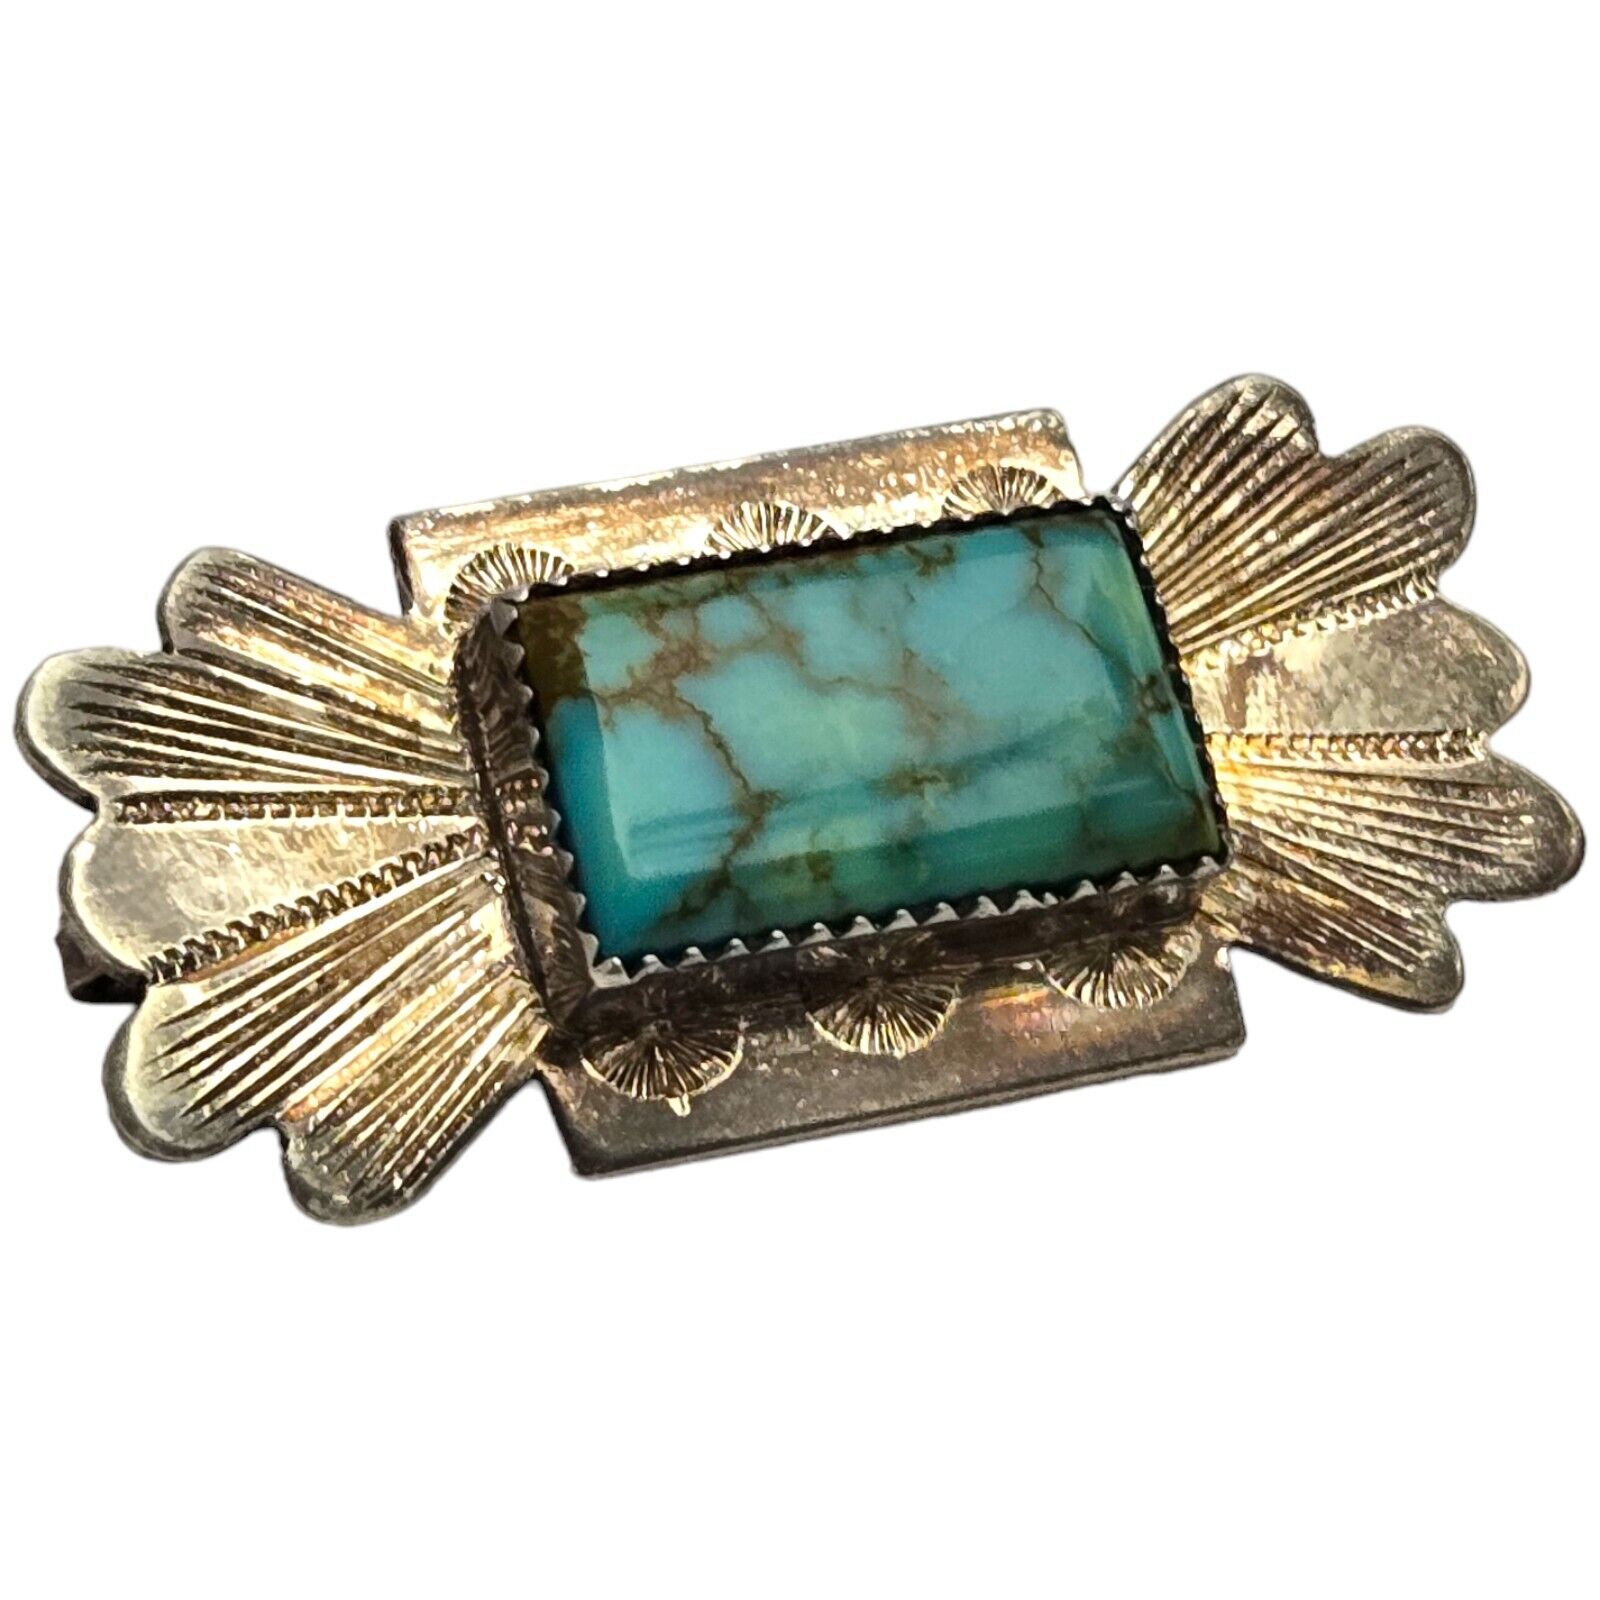 Handwrought Carico Lake Turquoise  Silver Brooch Pendant Navajo 1960s 